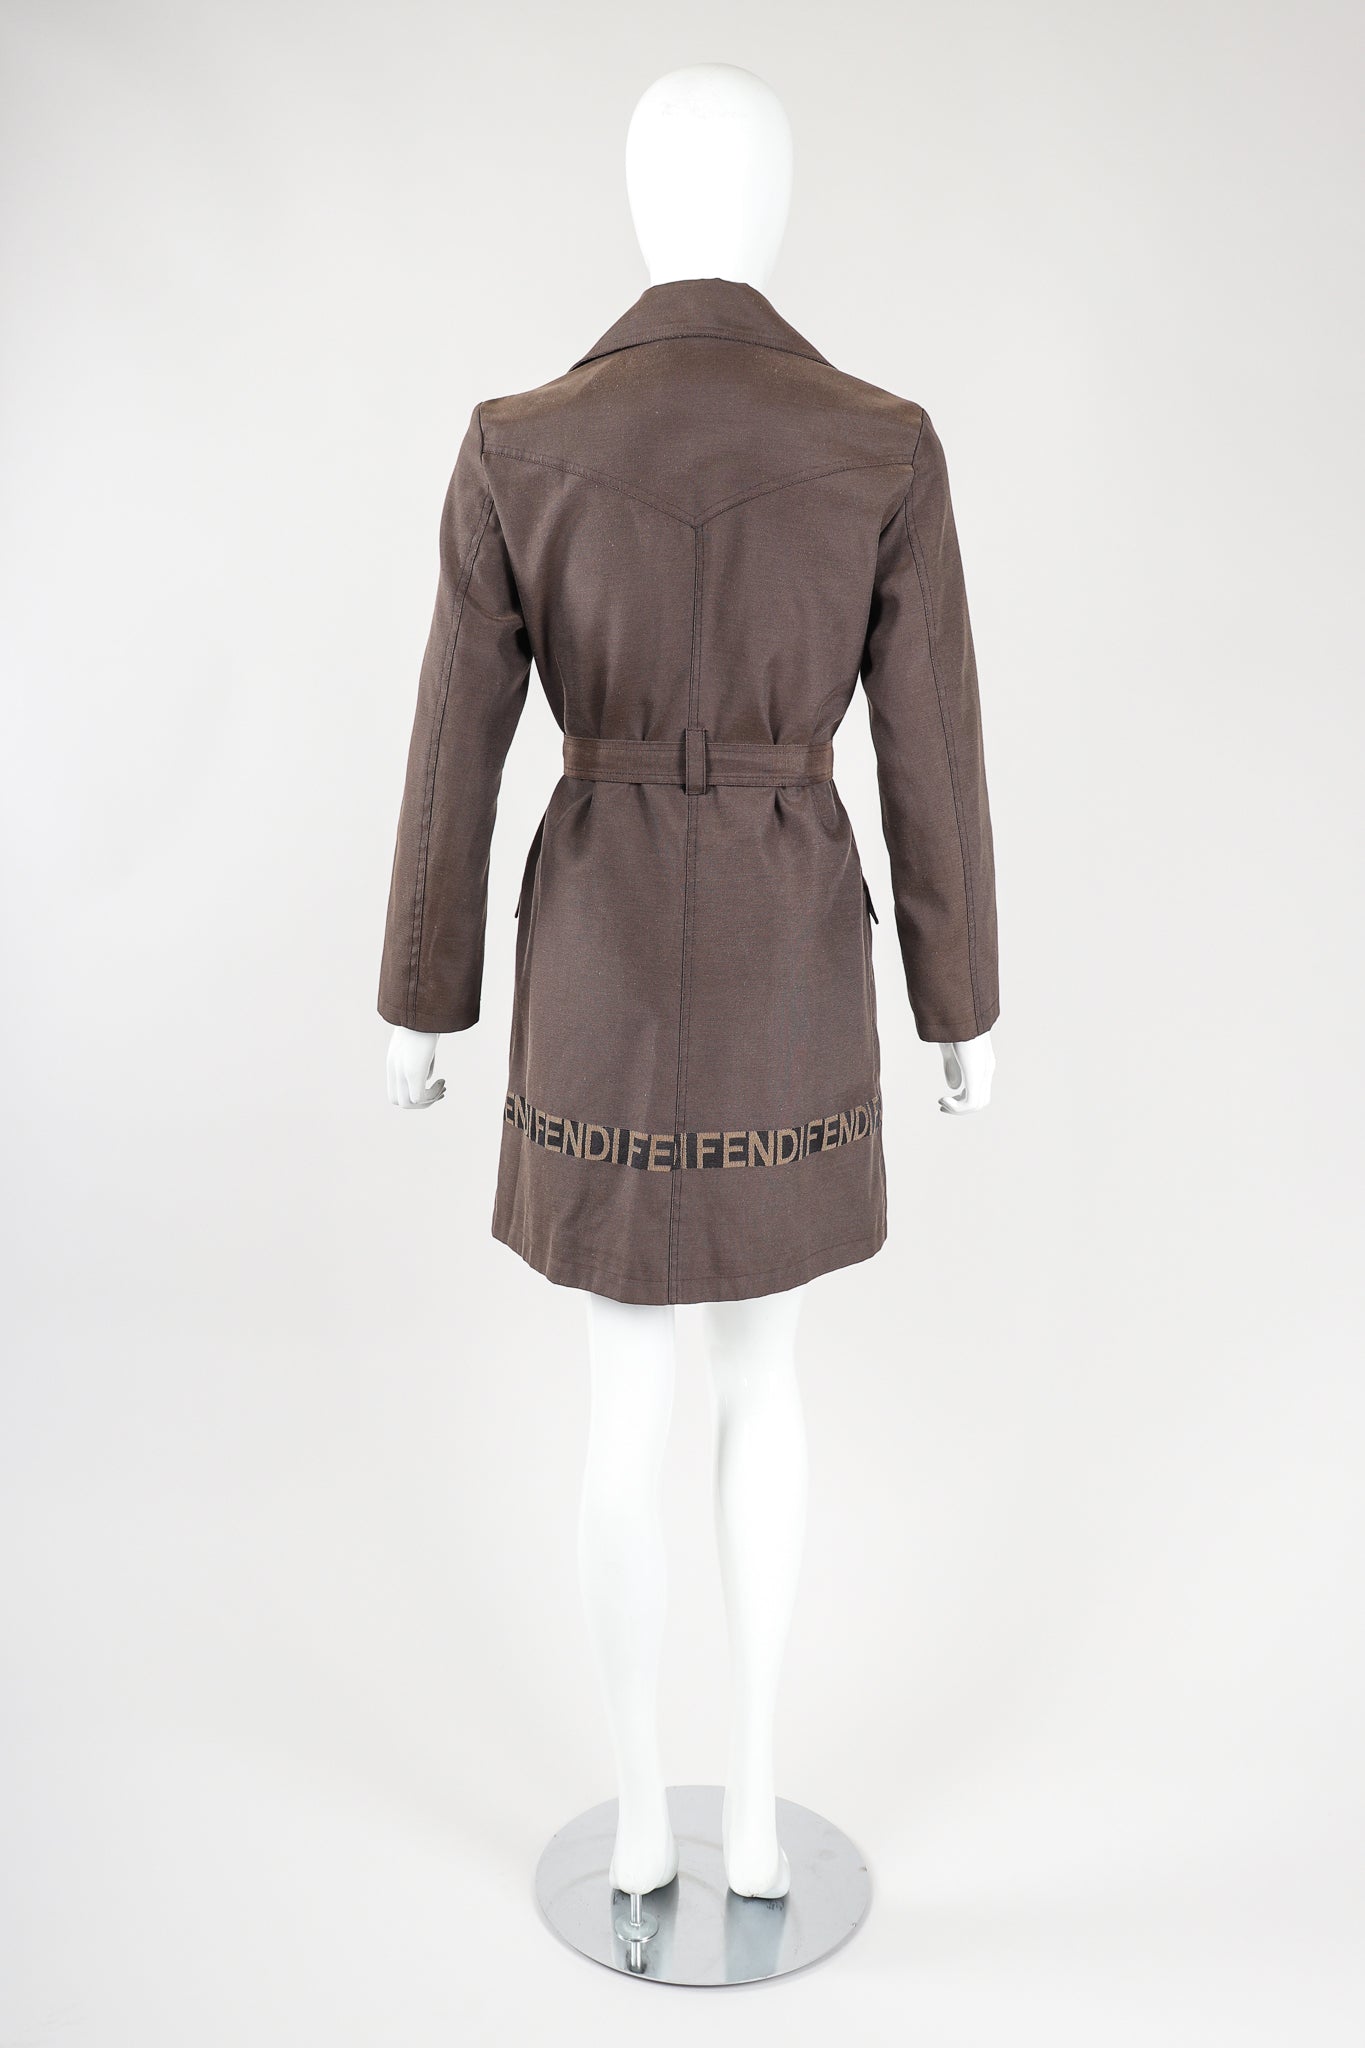 Recess Vintage Fendi Brown Canvas Trench Coat on Mannequin, back view